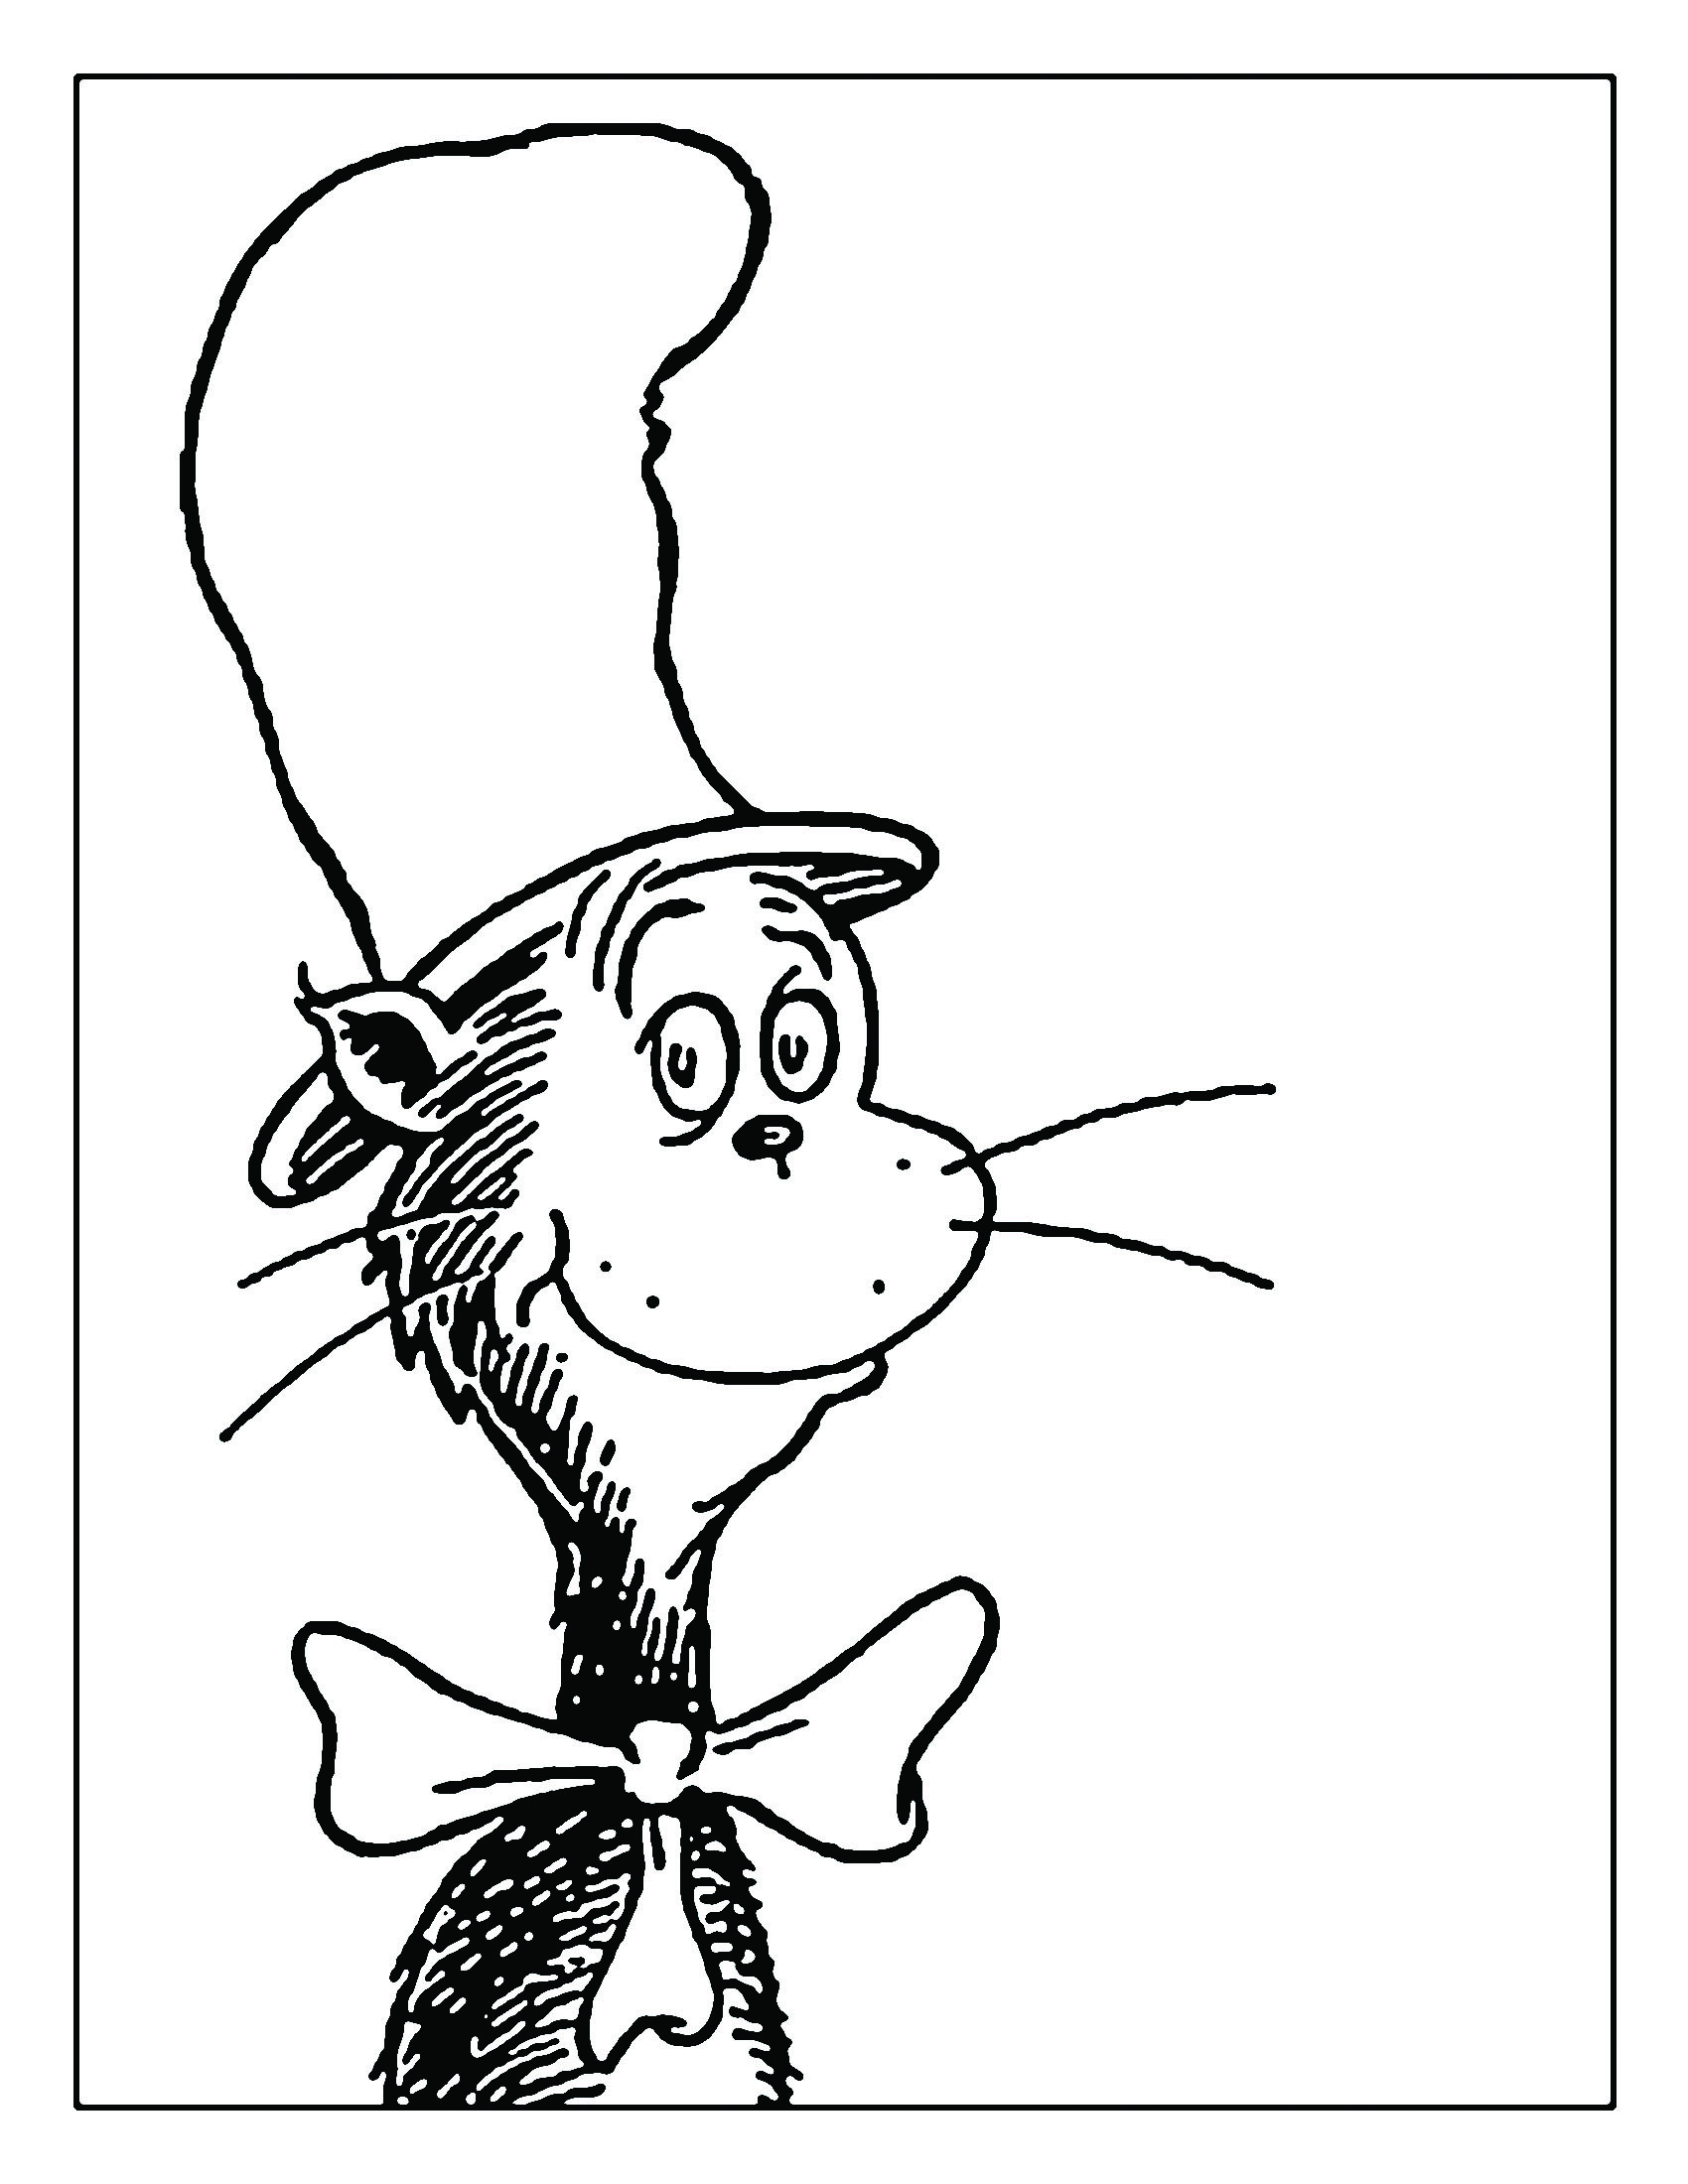 Images For > Dr Seuss Cat In The Hat Clipart Black And White